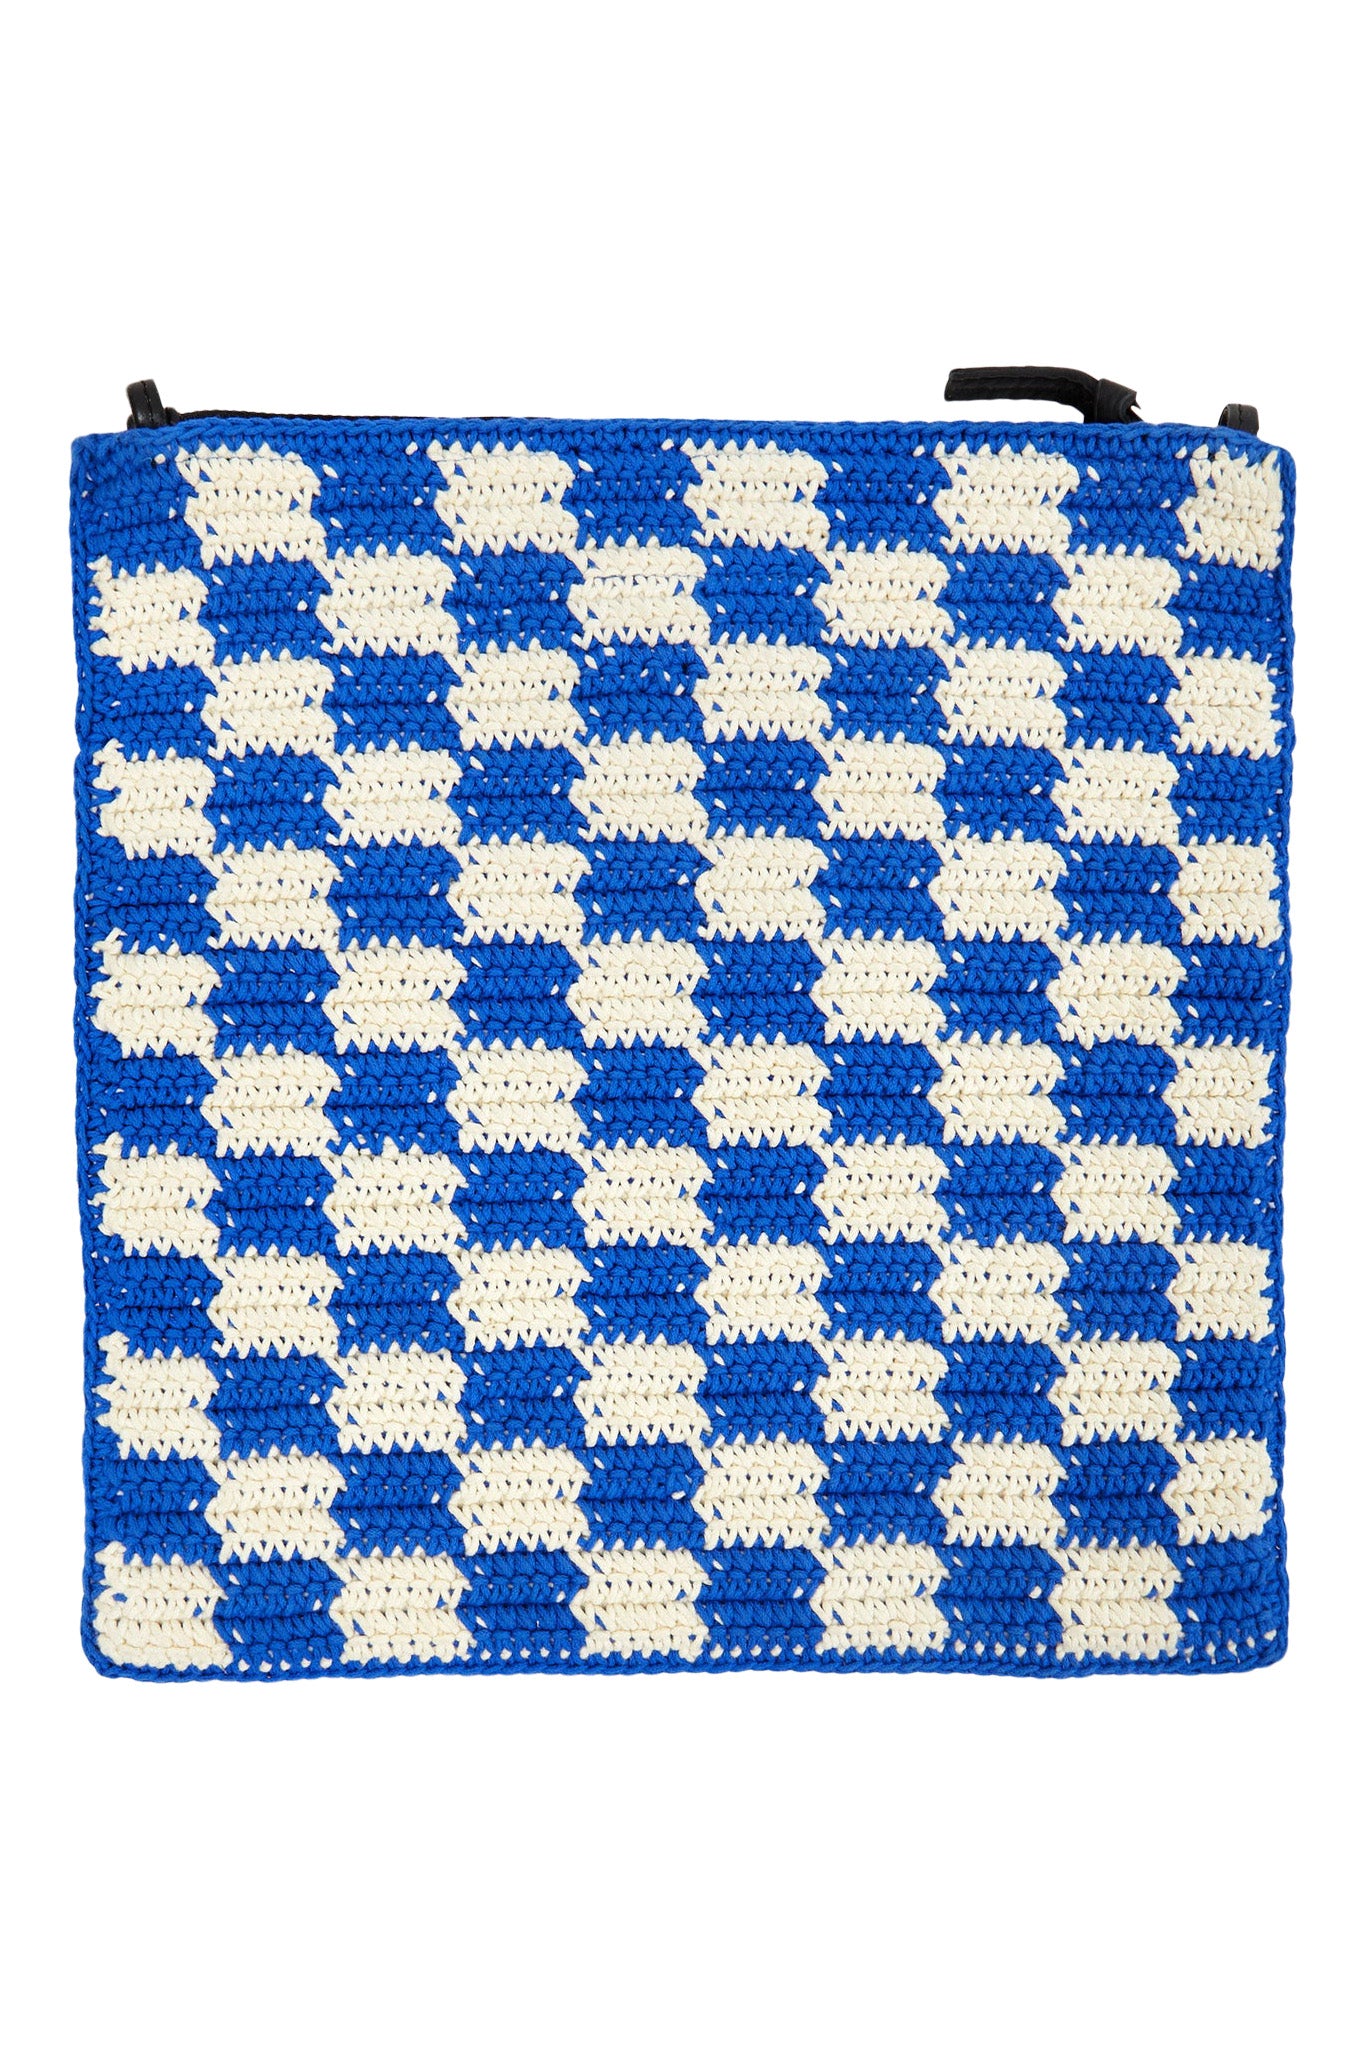 Clare V. Foldover Clutch with Tabs in Cobalt & Cream Crochet Checker